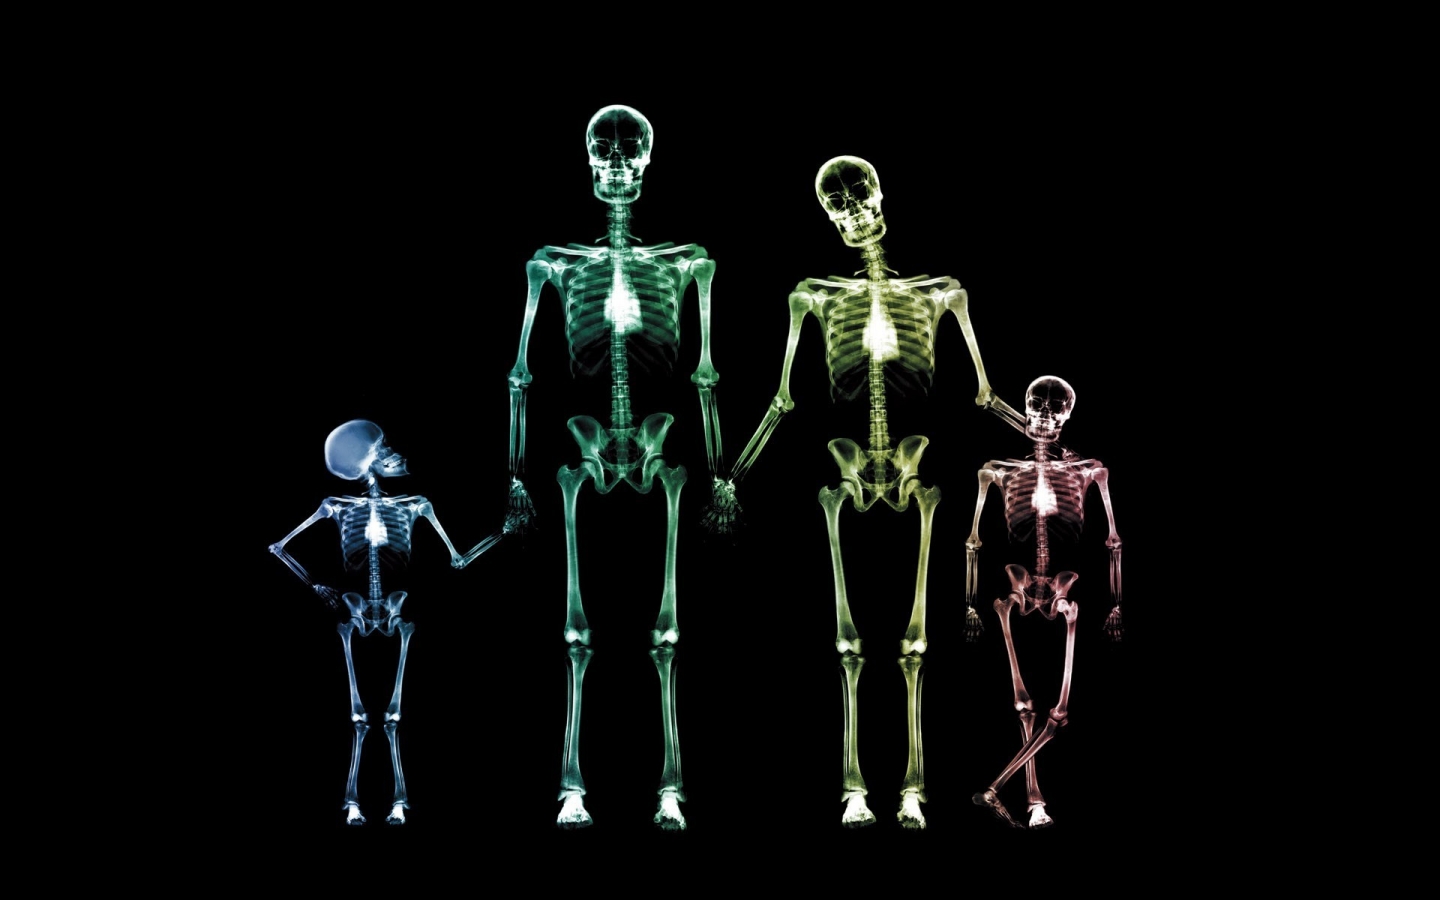 Family Skeletons for 1440 x 900 widescreen resolution